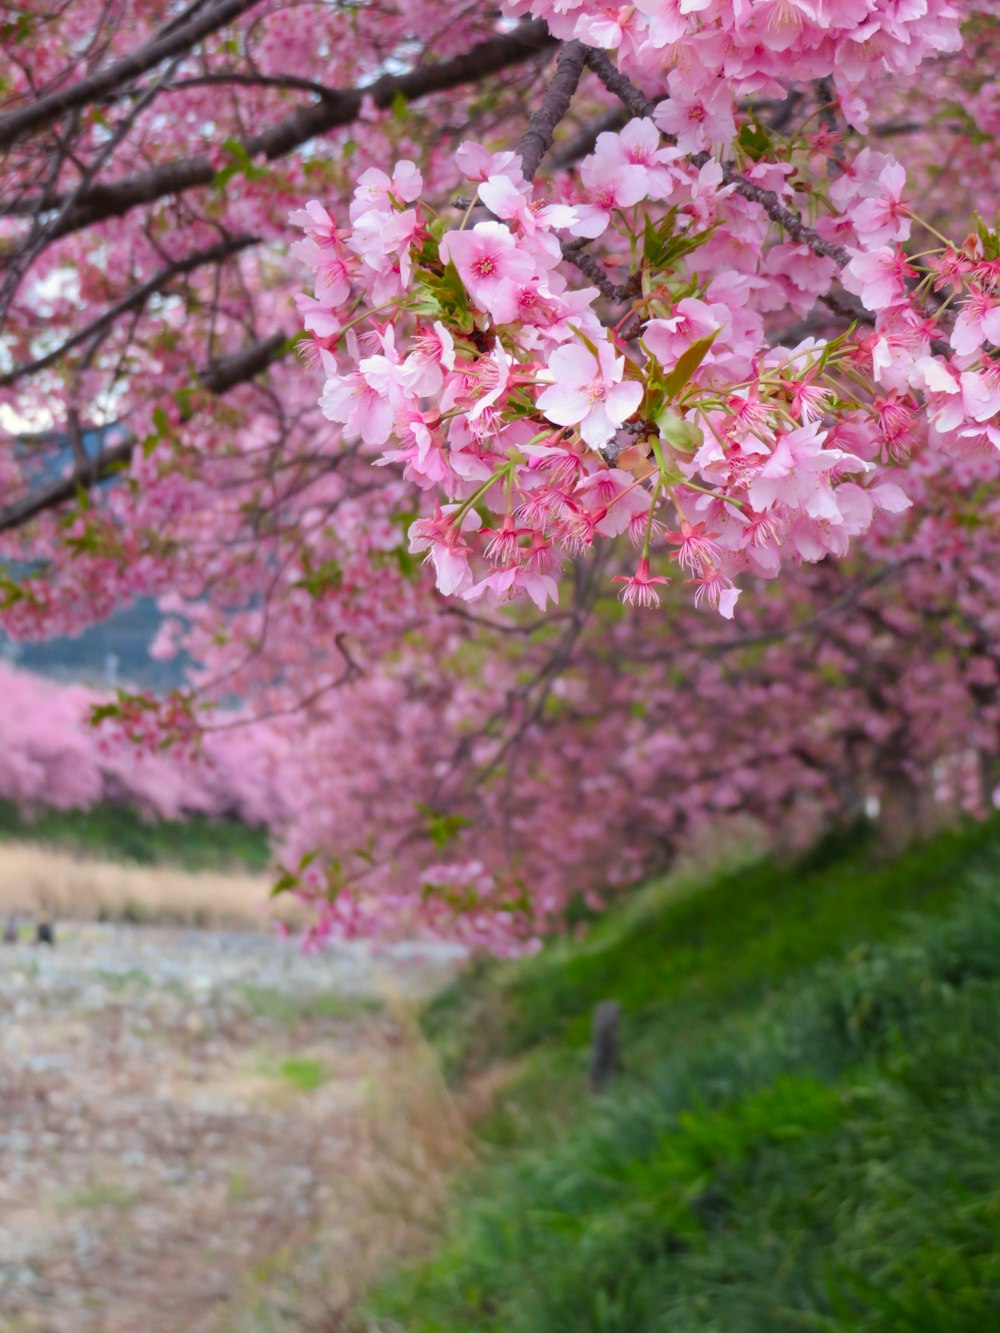 a tree with pink flowers on it next to a dirt road